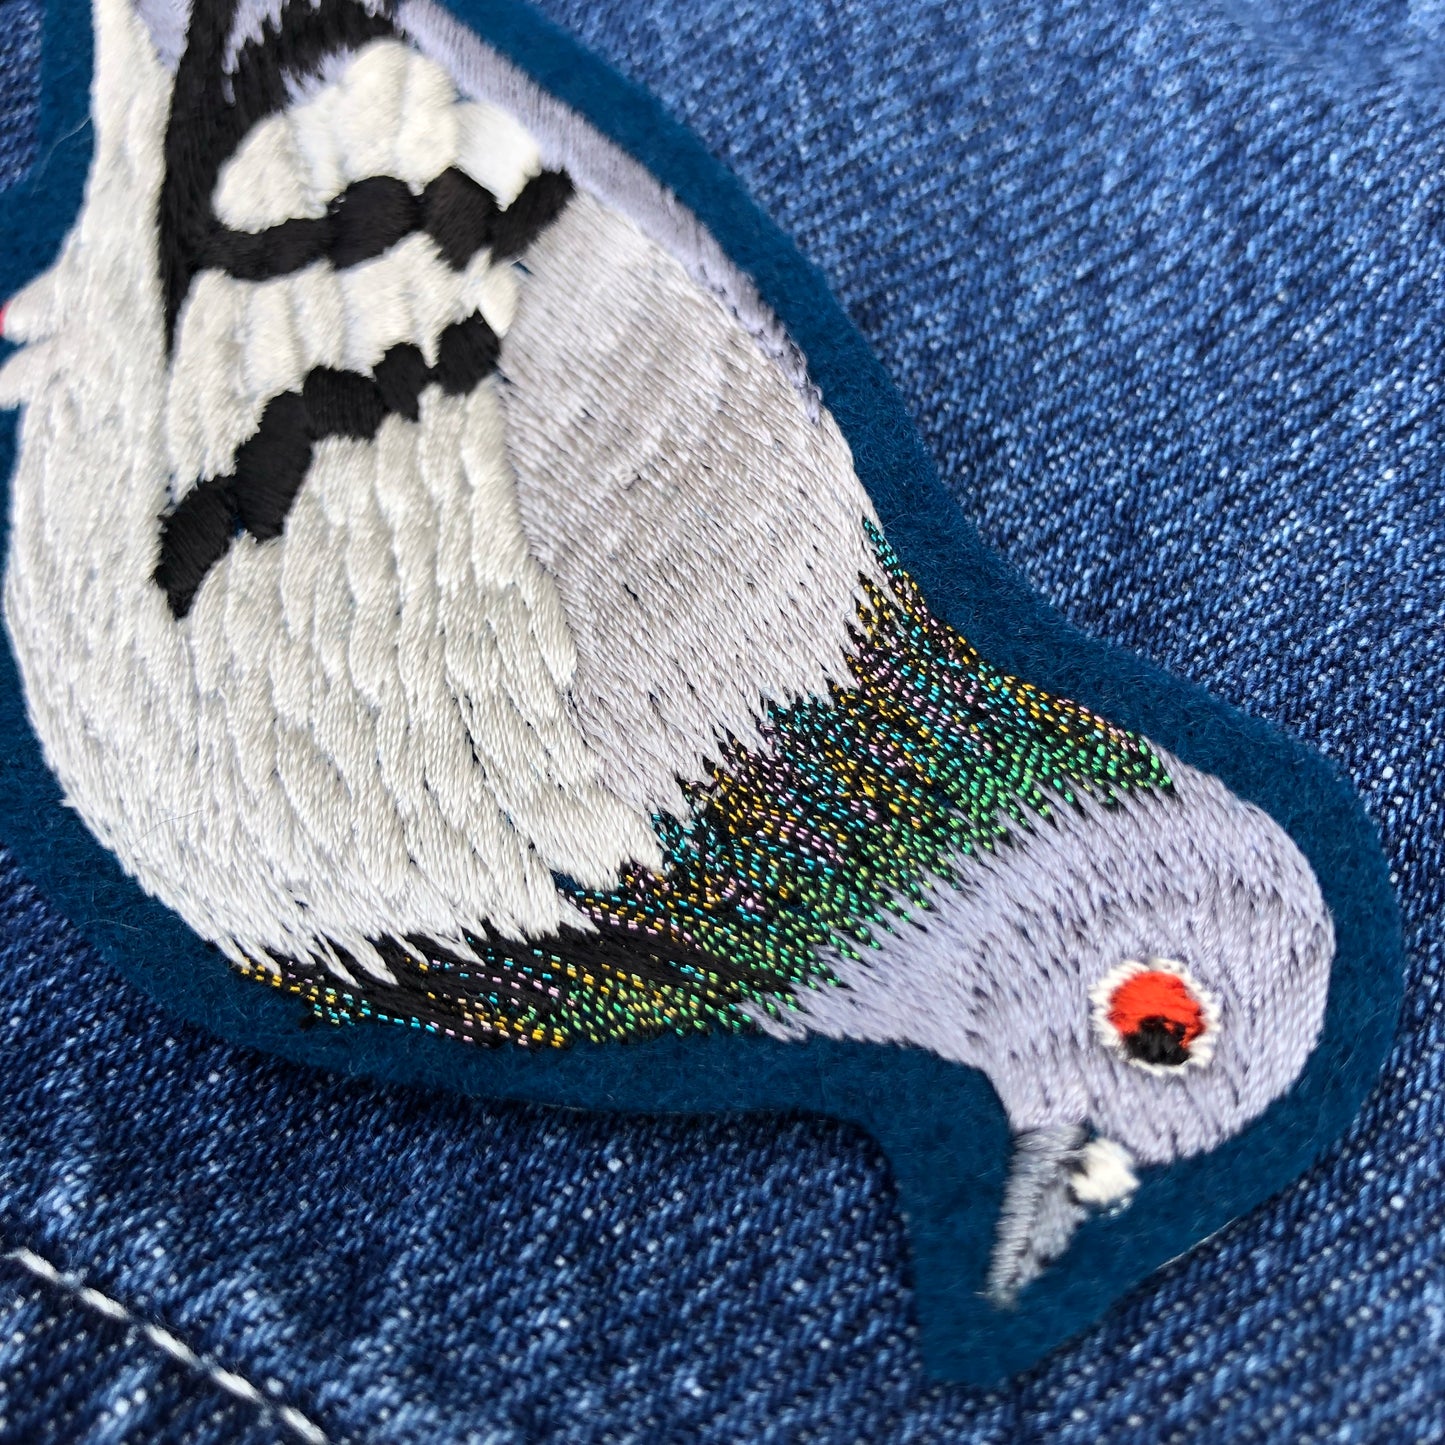 Close-up of pigeon embroidered patch showing metallic neckline of the pigeon